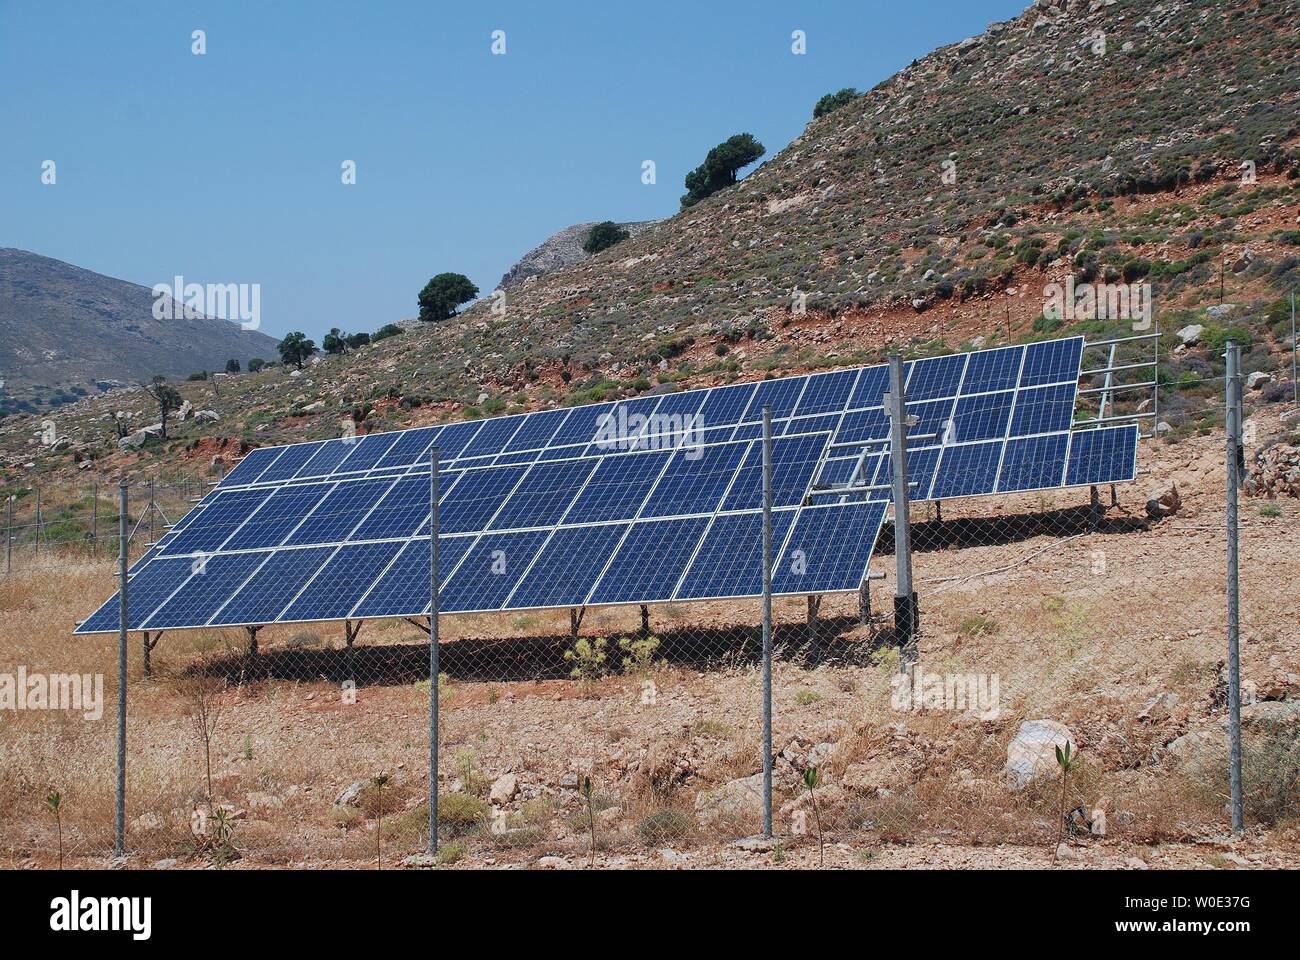 A bank of solar energy panels on the Greek island of Tilos. The island aims to be self sufficient in power through solar and wind energy. Stock Photo